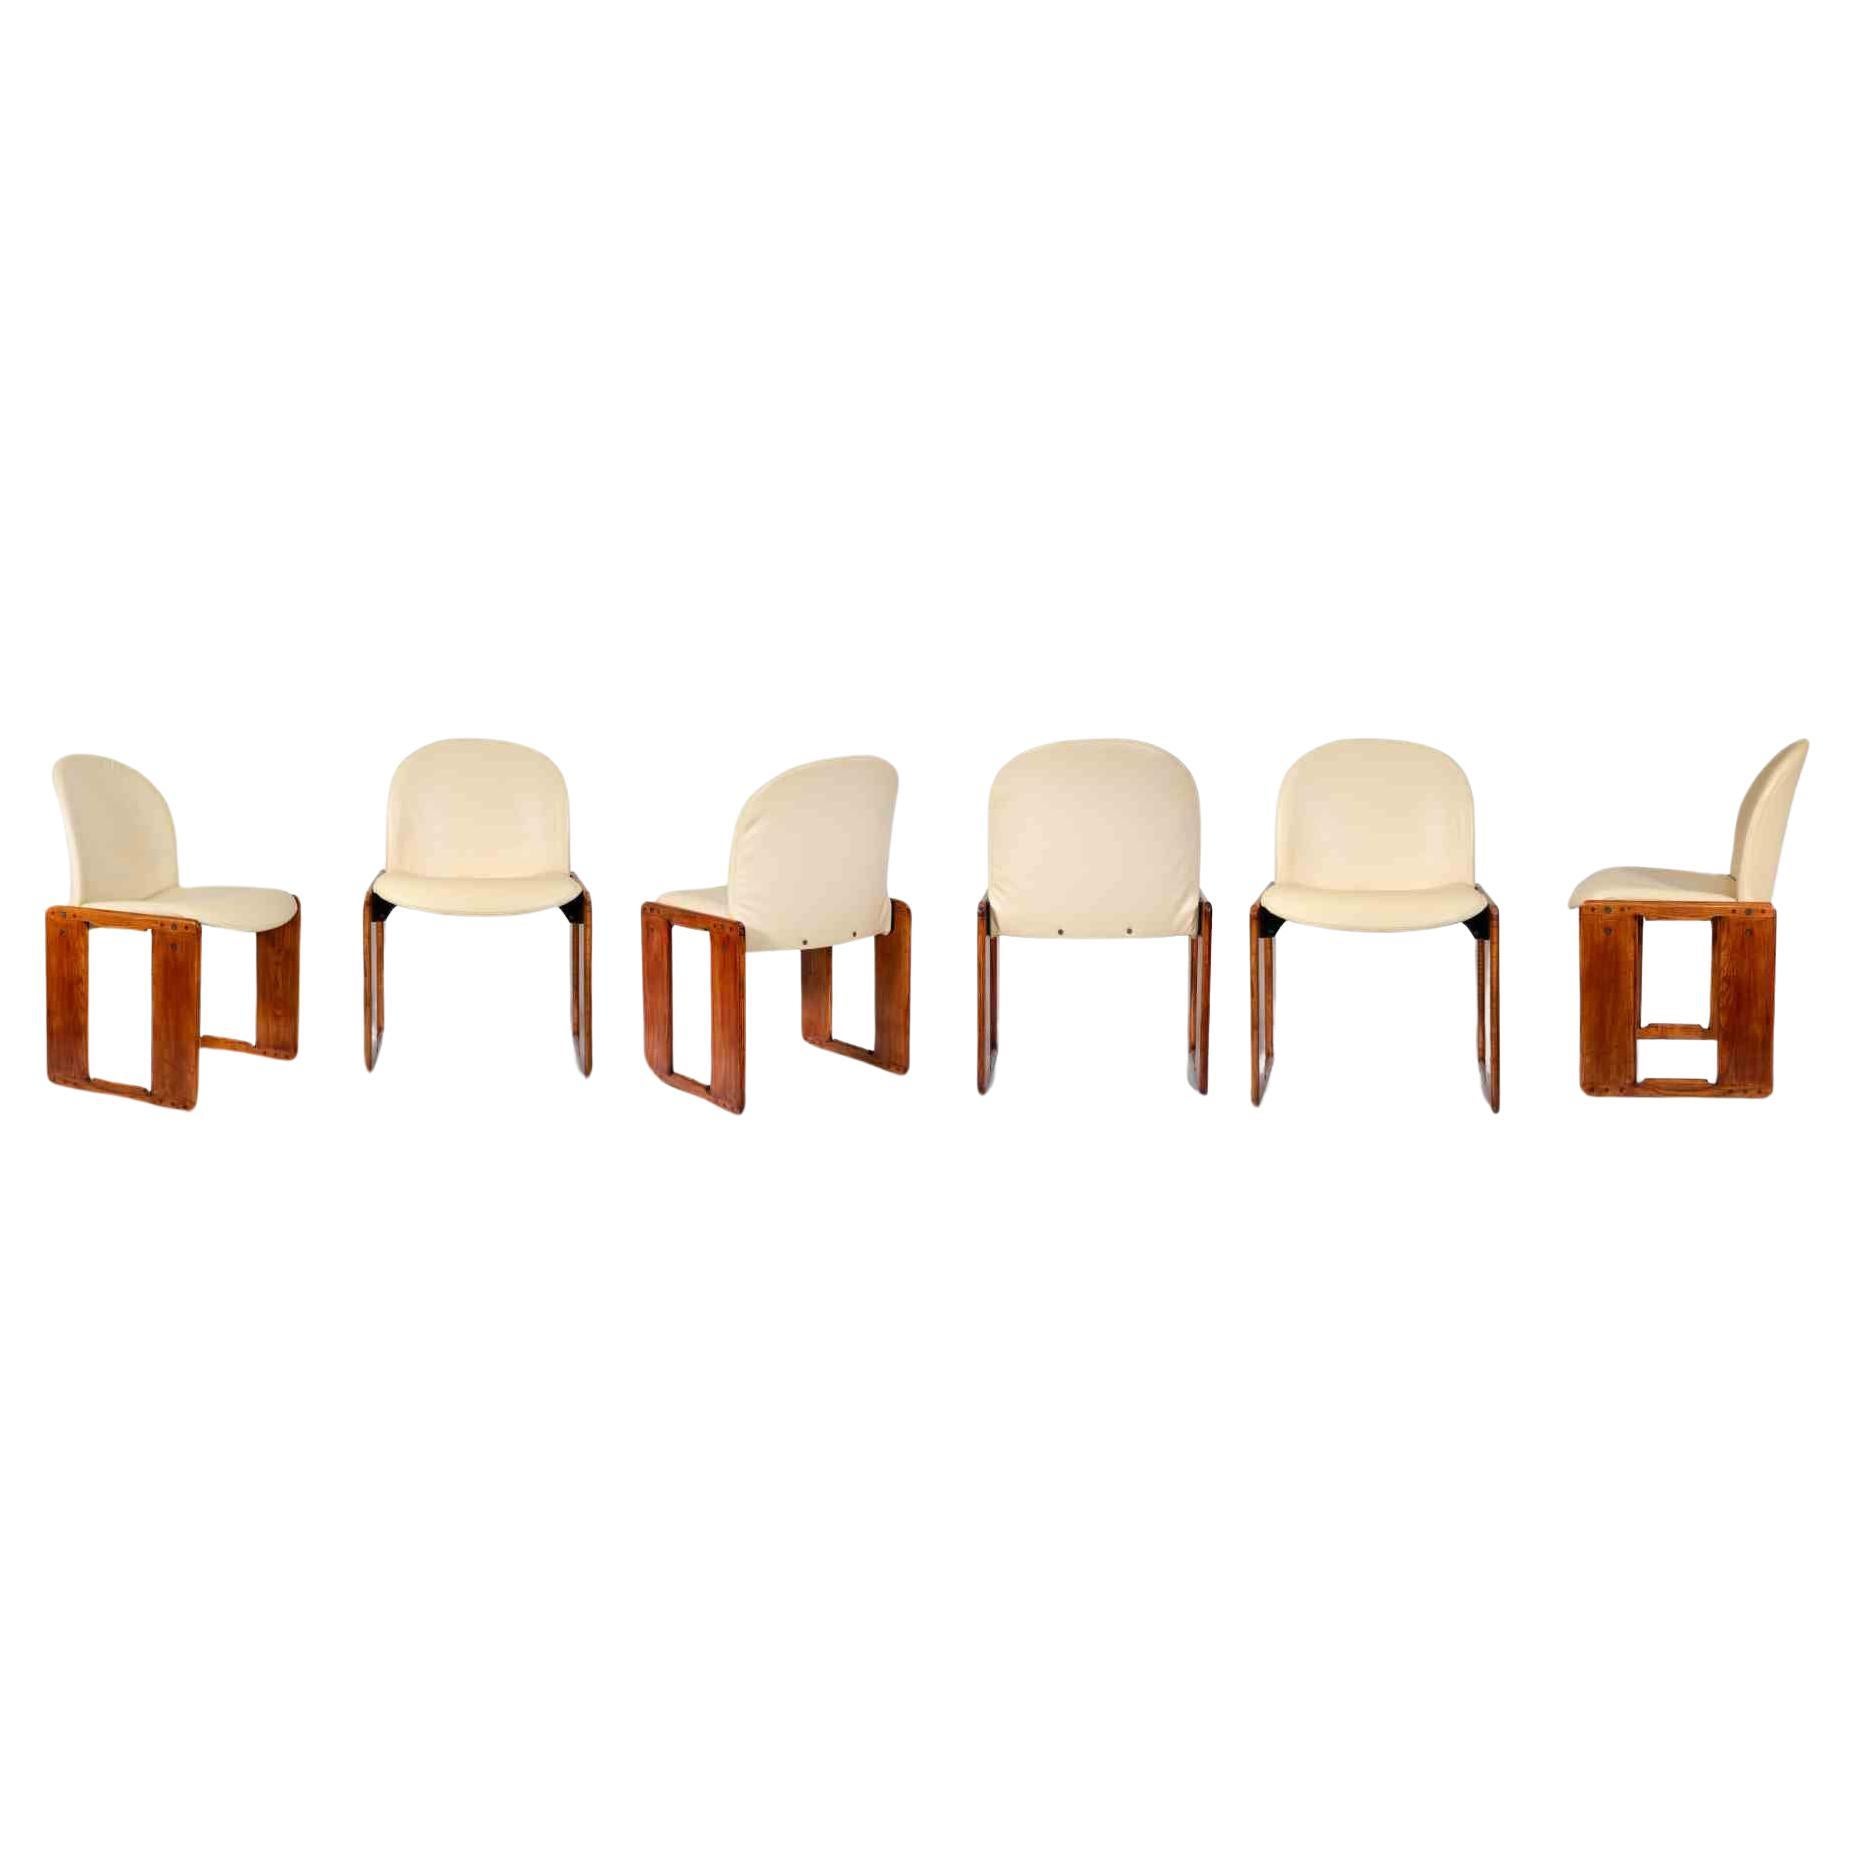 Set of 6 Dialogo Chairs by Afra and Tobia Scarpa for B&B Italia, 1973